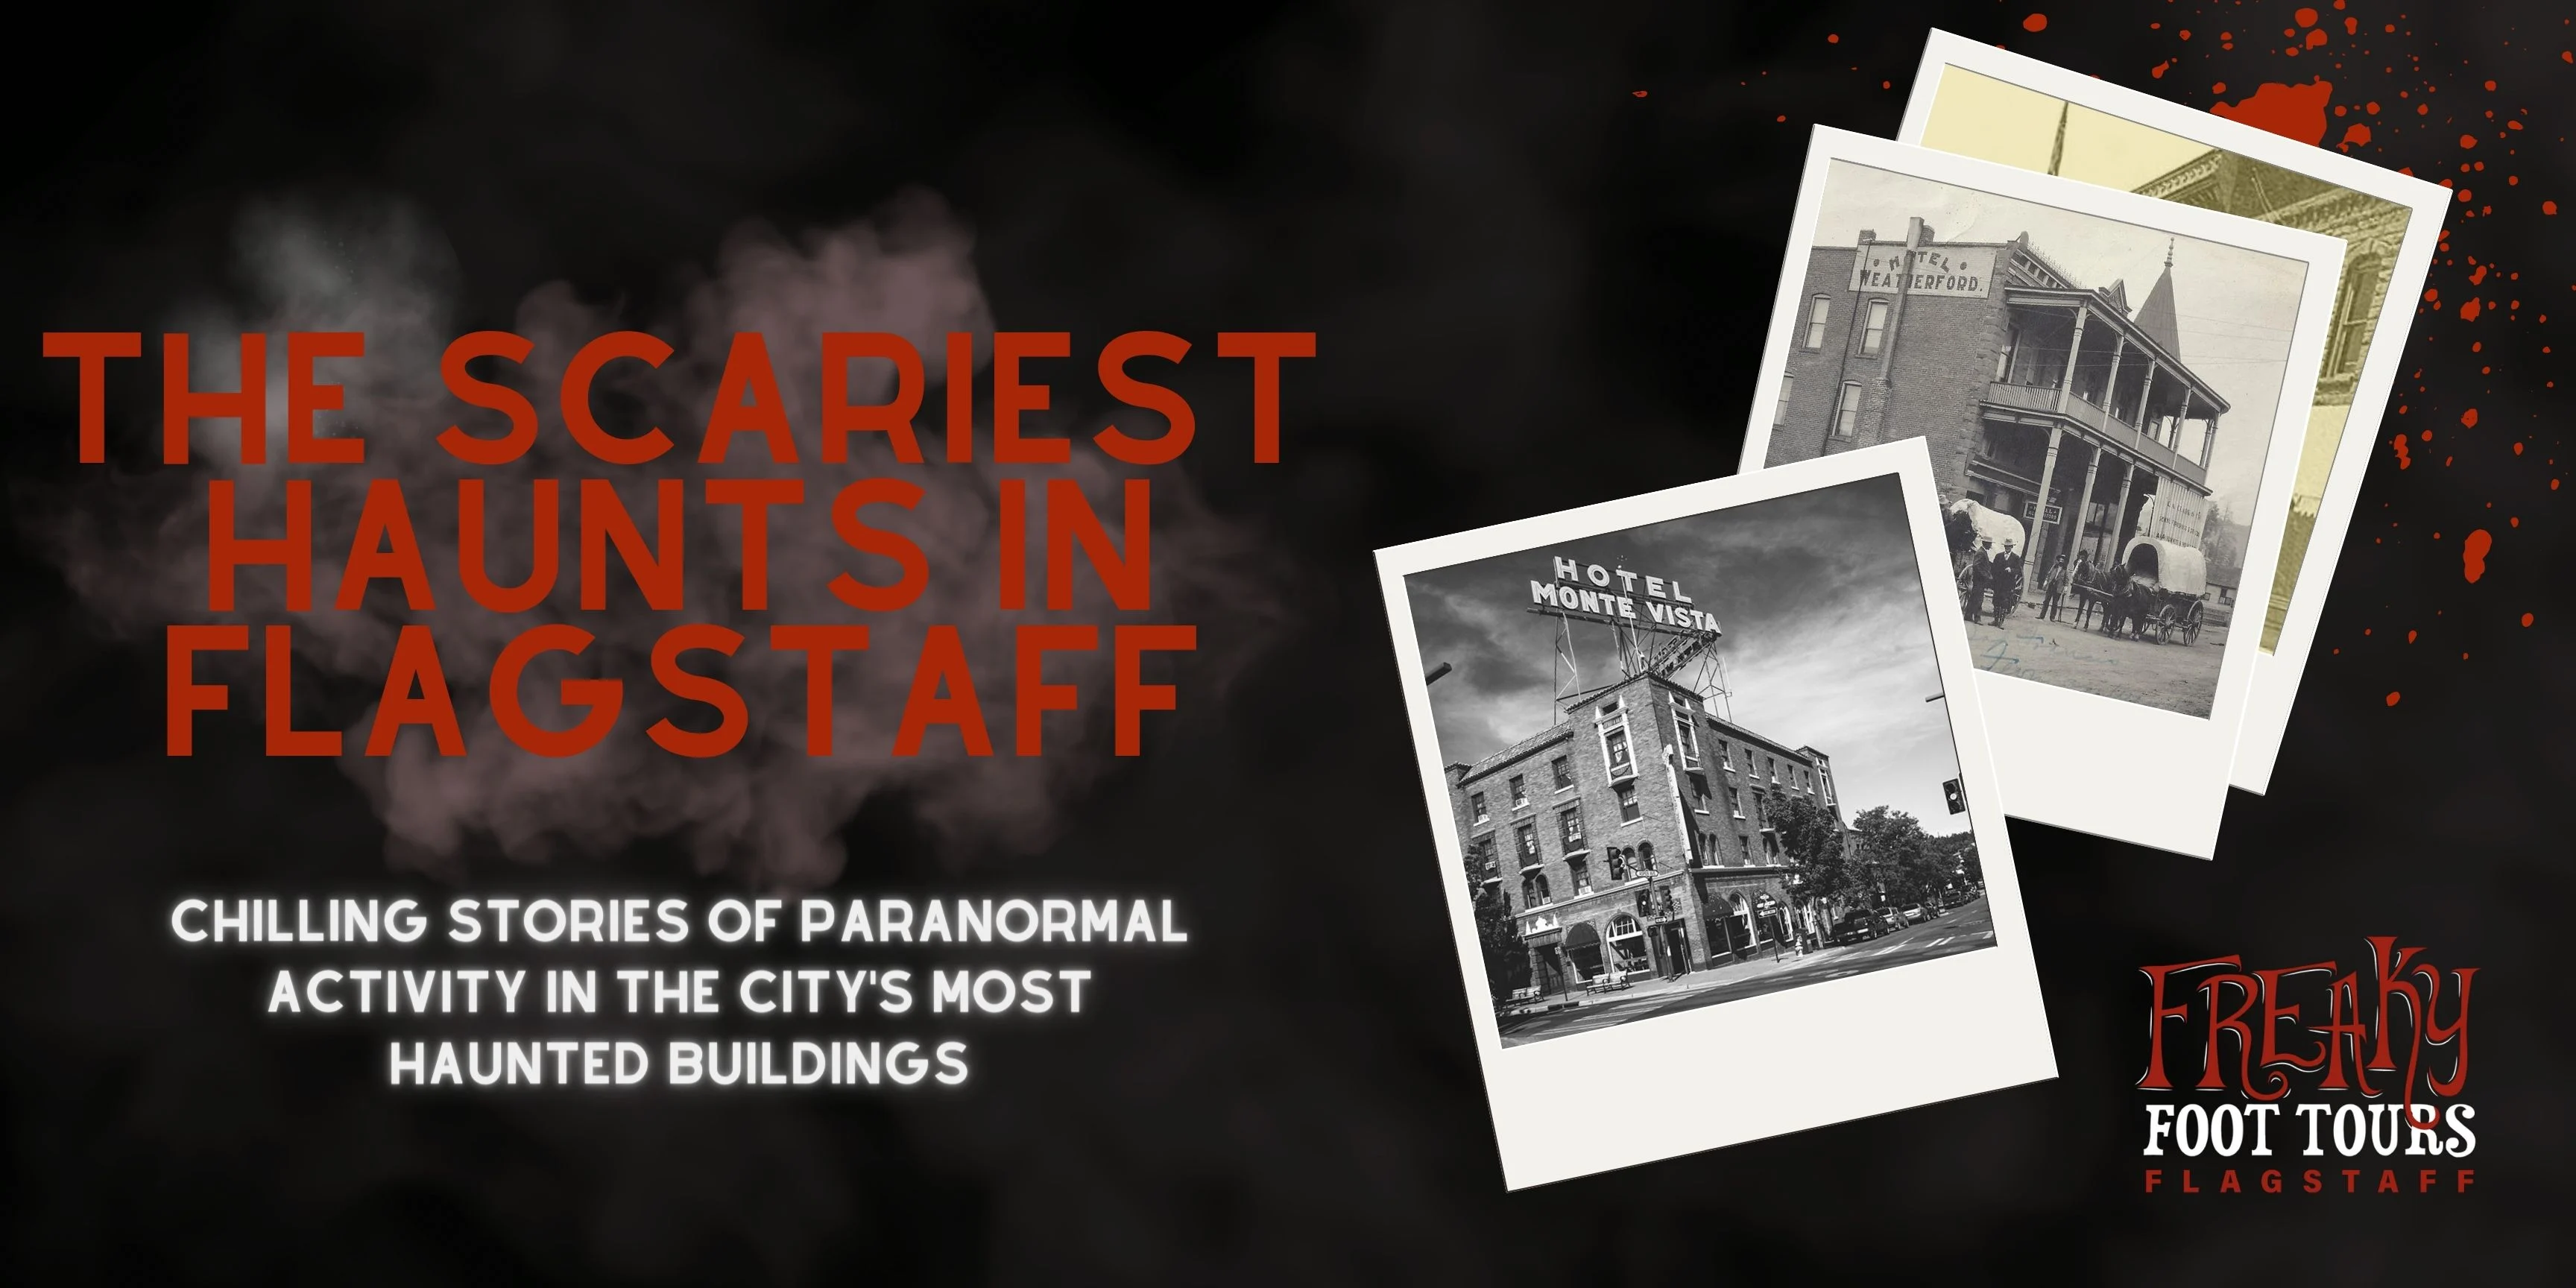 Which Place is the Most Haunted in Flagstaff?